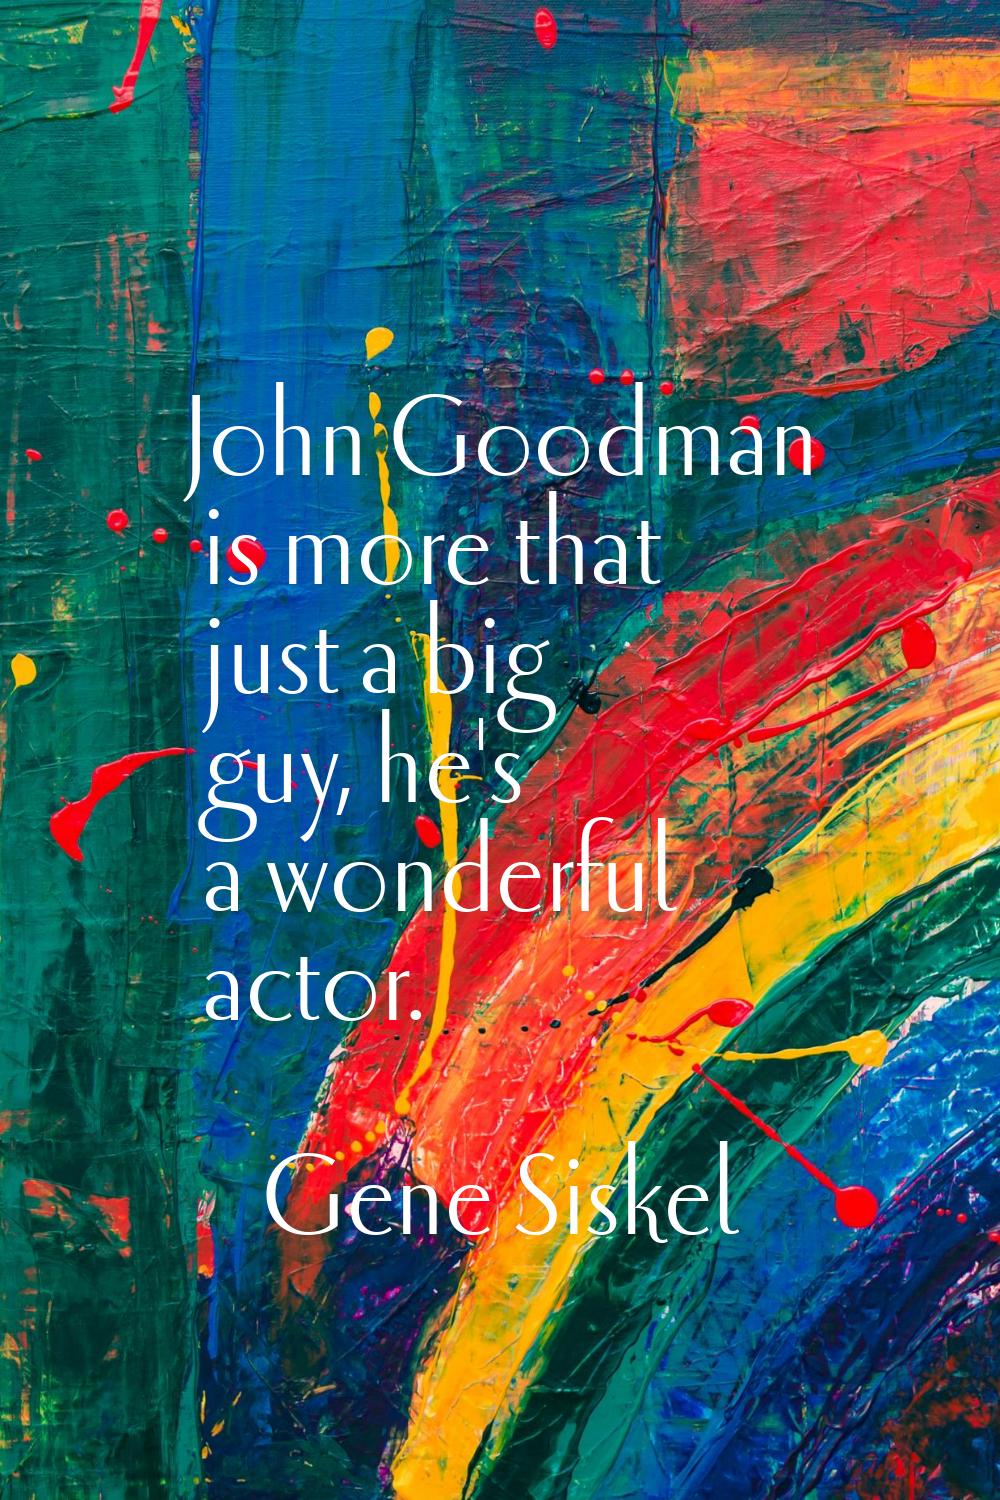 John Goodman is more that just a big guy, he's a wonderful actor.